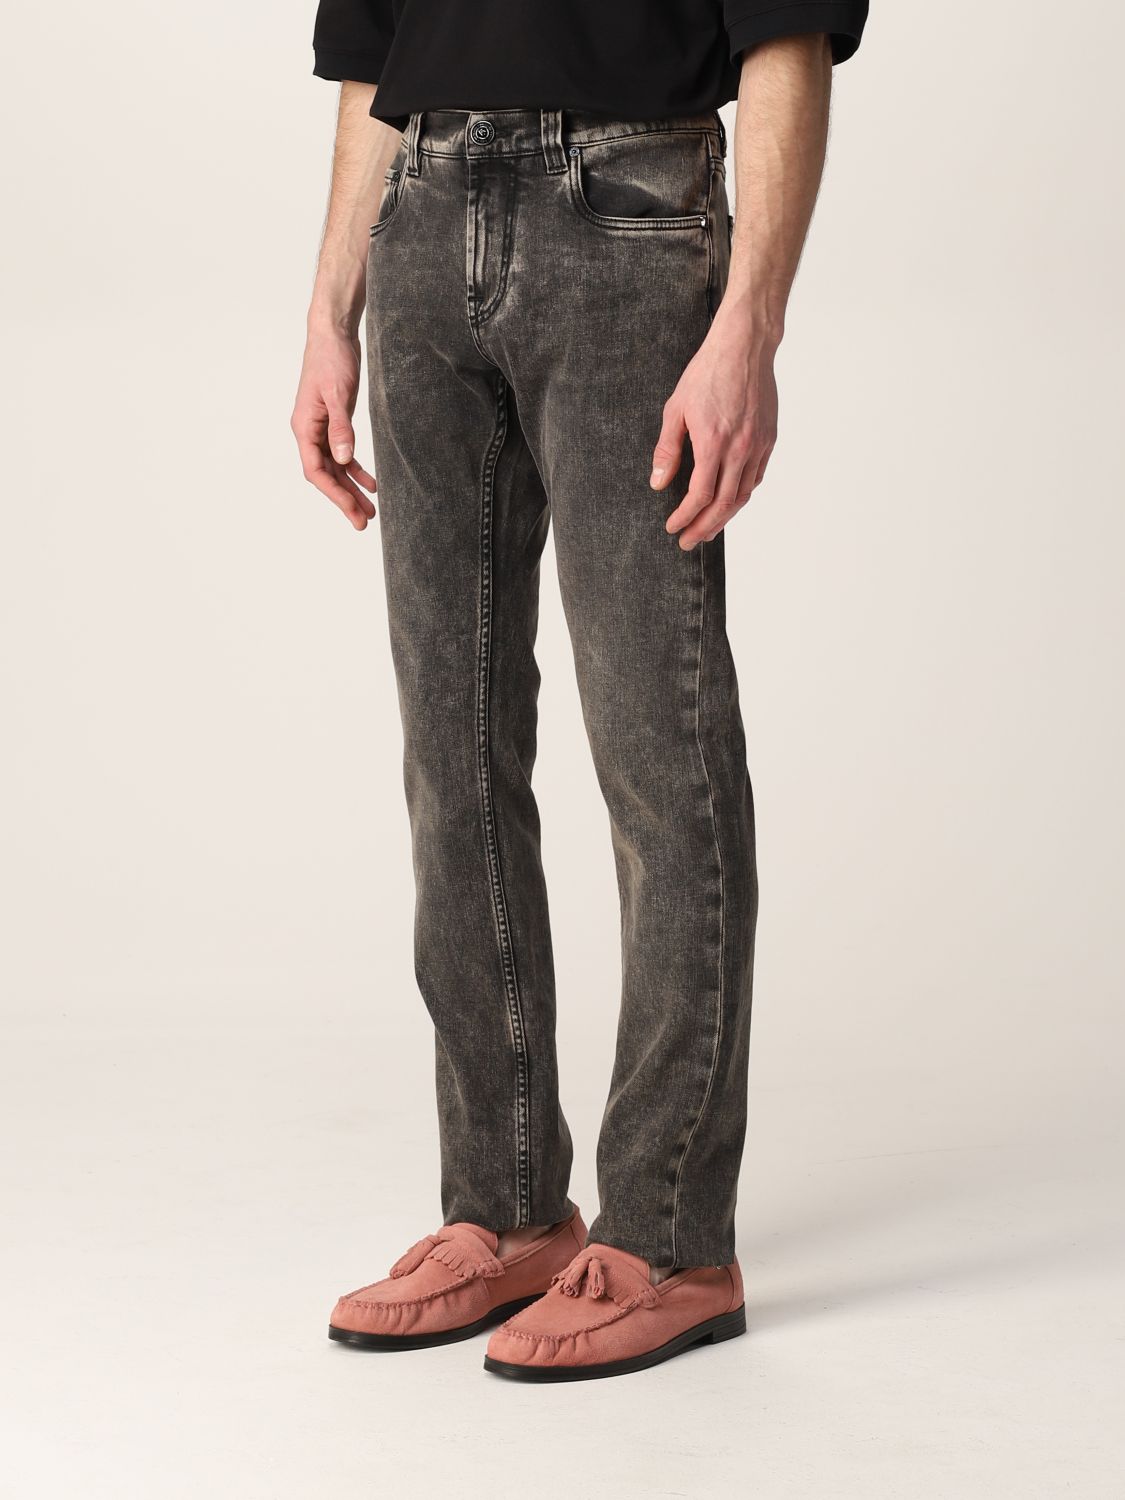 Black Etro Denim Back To The Future 5-pocket Jeans in Grey Mens Jeans Etro Jeans for Men Save 8% 